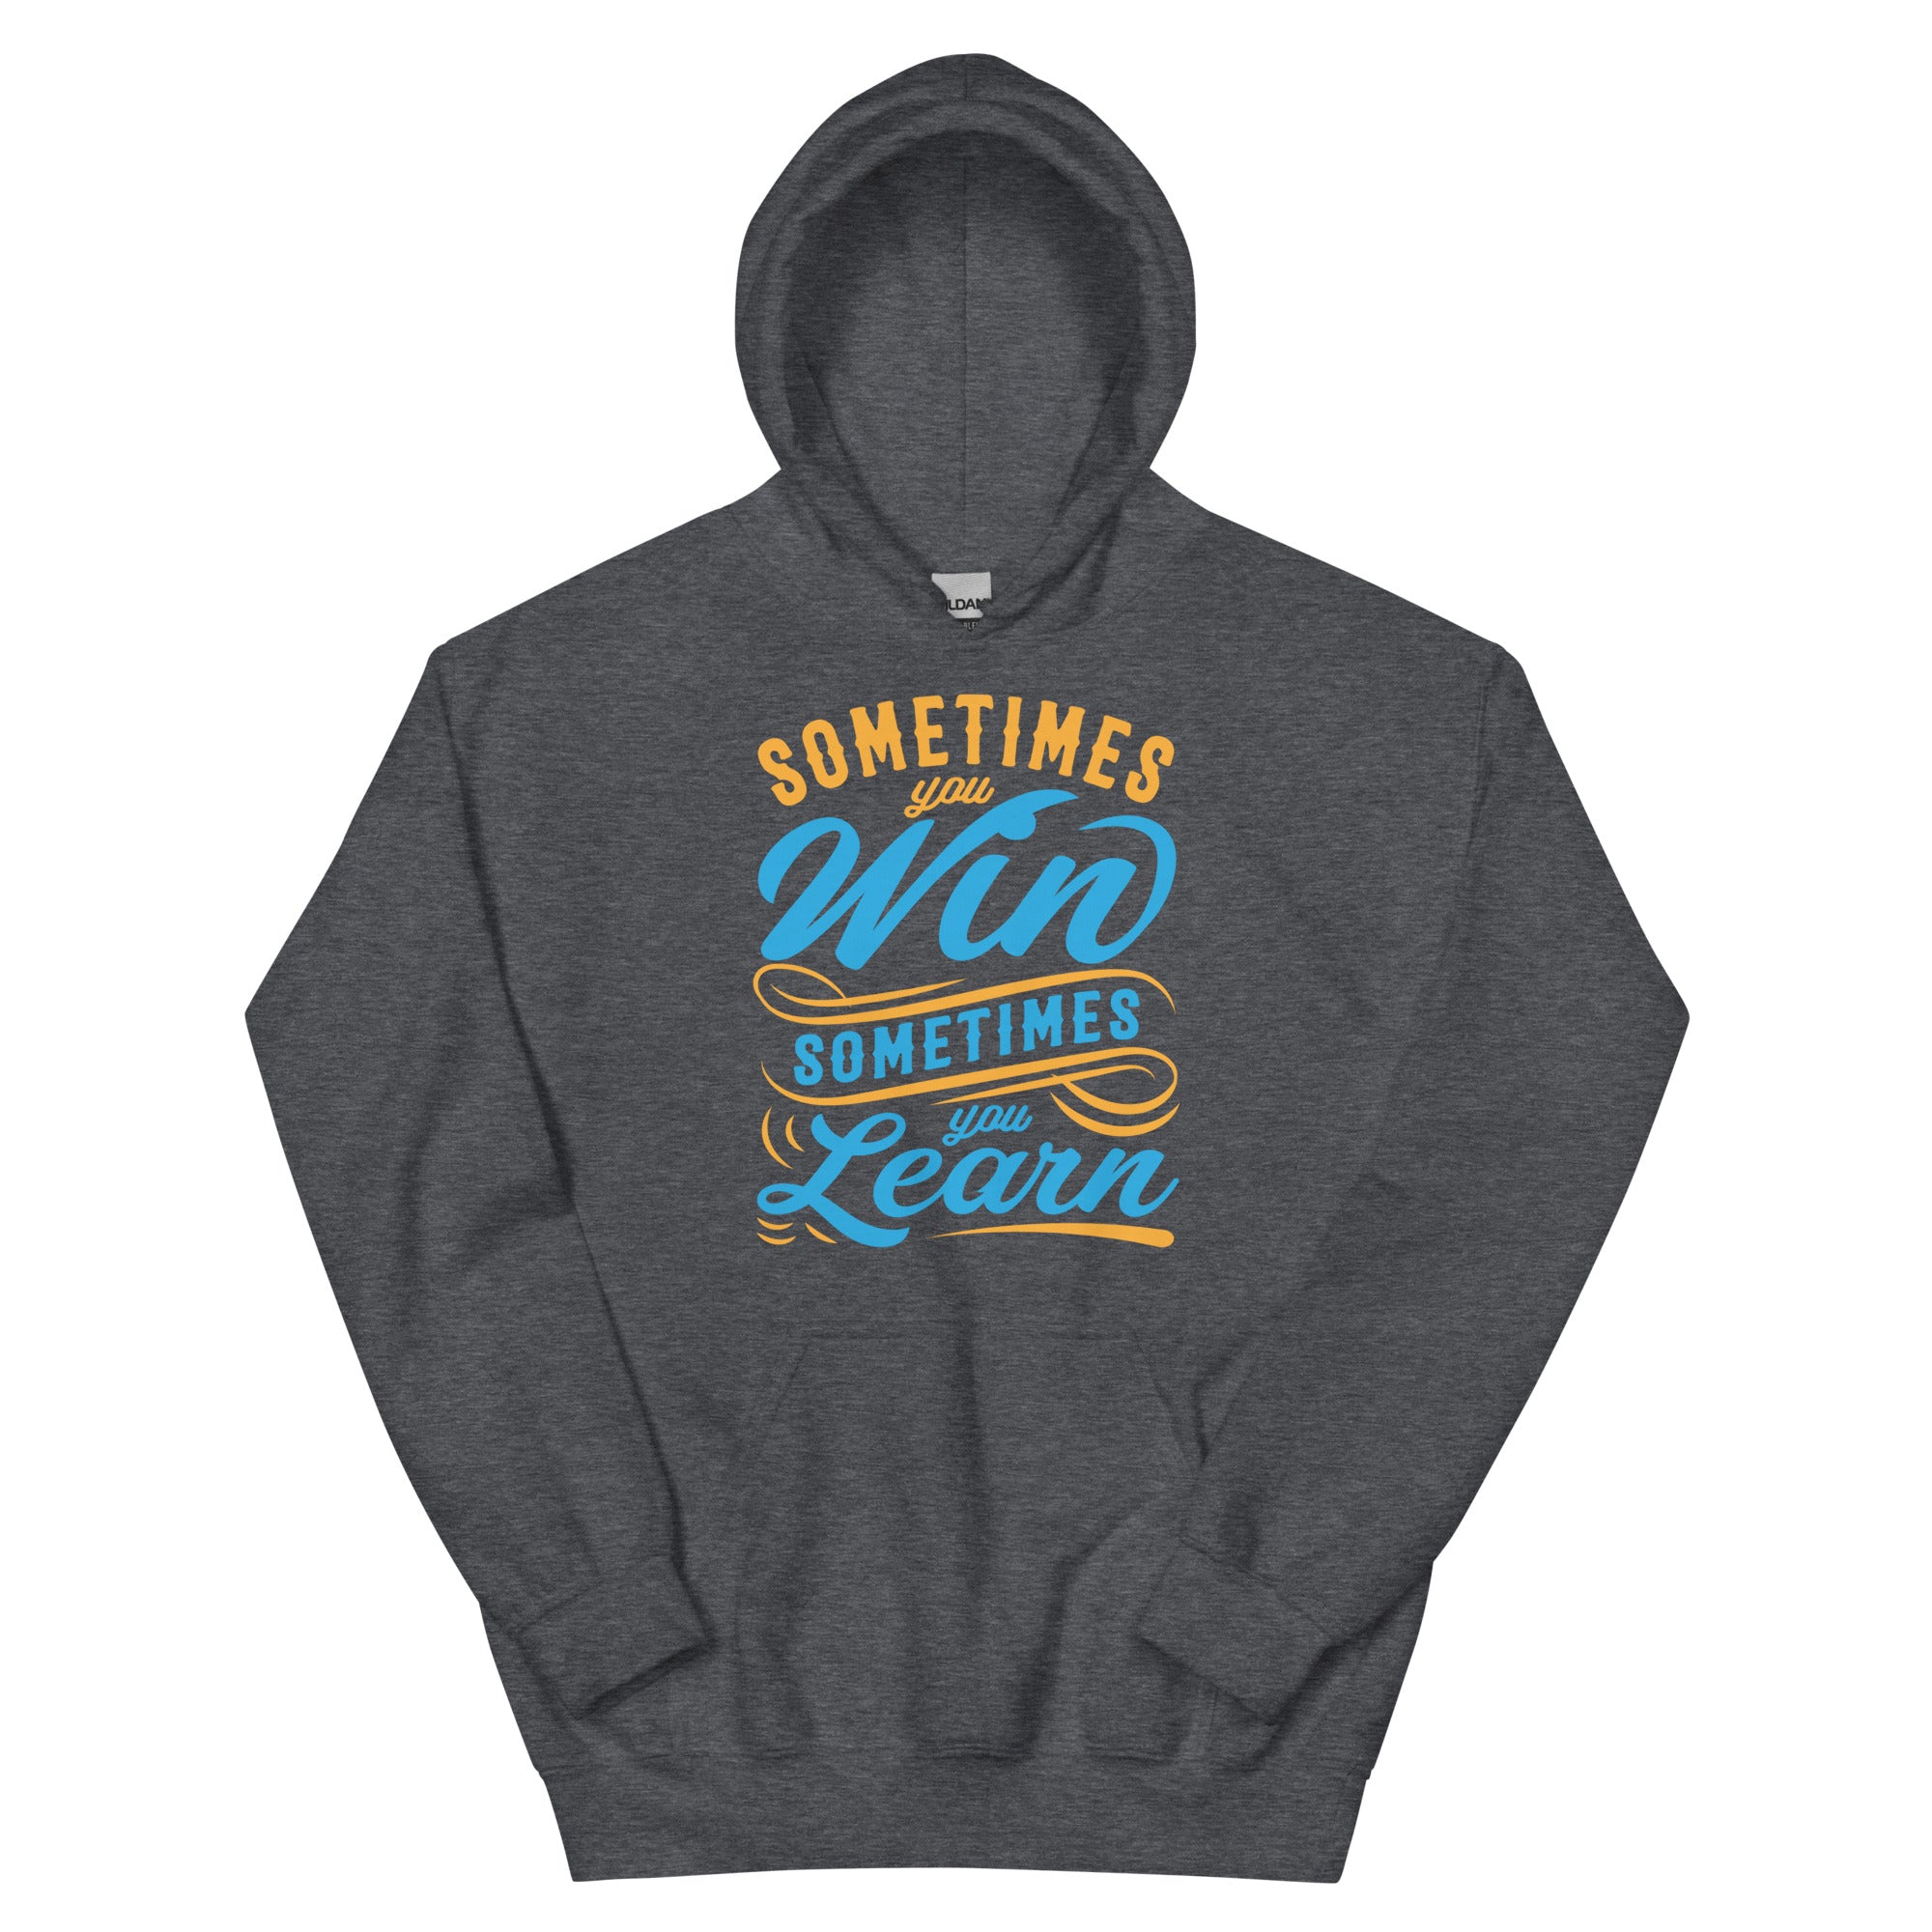 Sometimes You Win, Sometimes You Learn - Unisex Hoodie